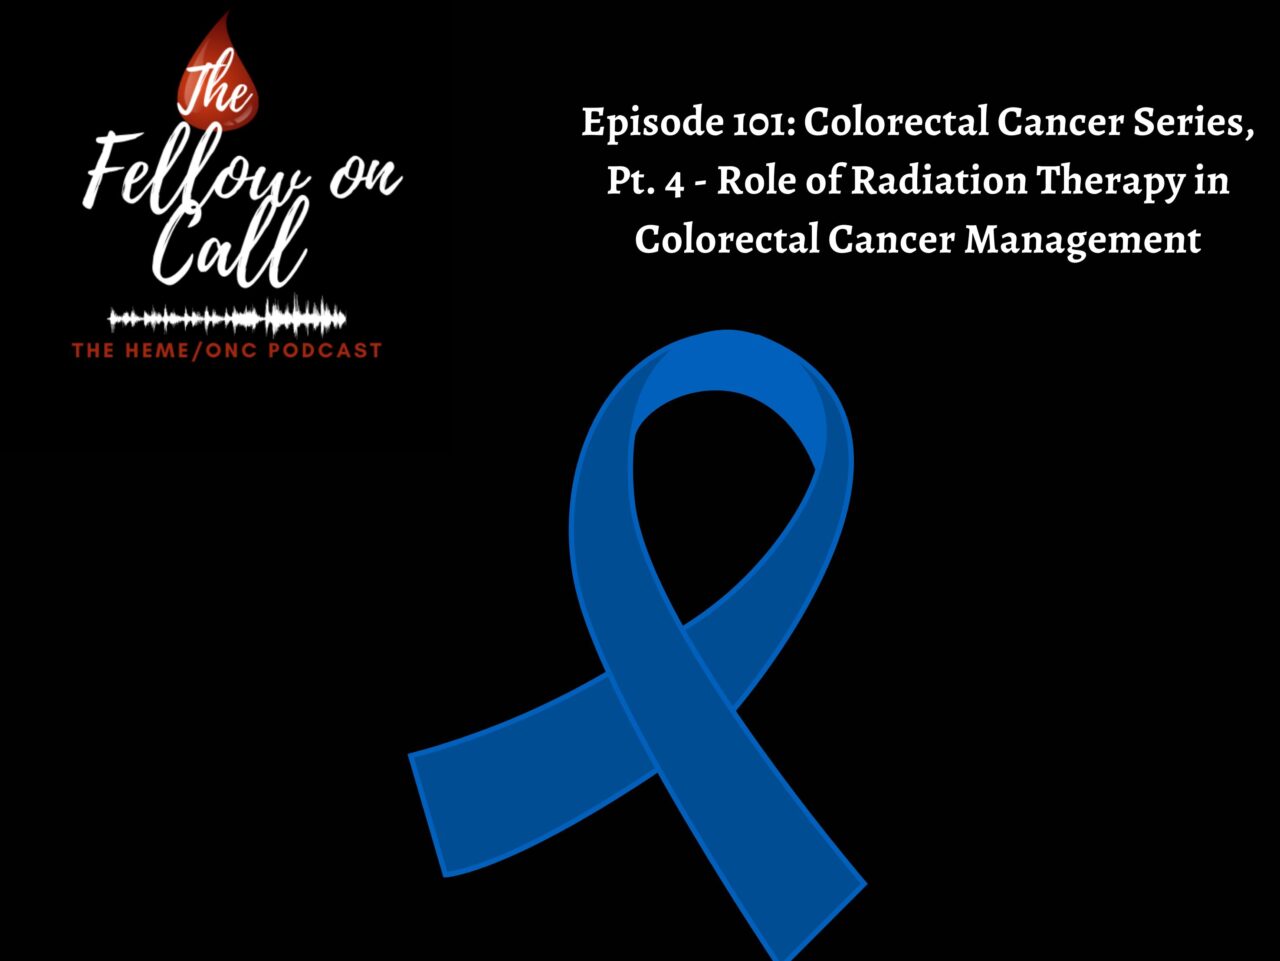 Khashayar Fattah: What a great podcast about the role of radiation in rectal cancer